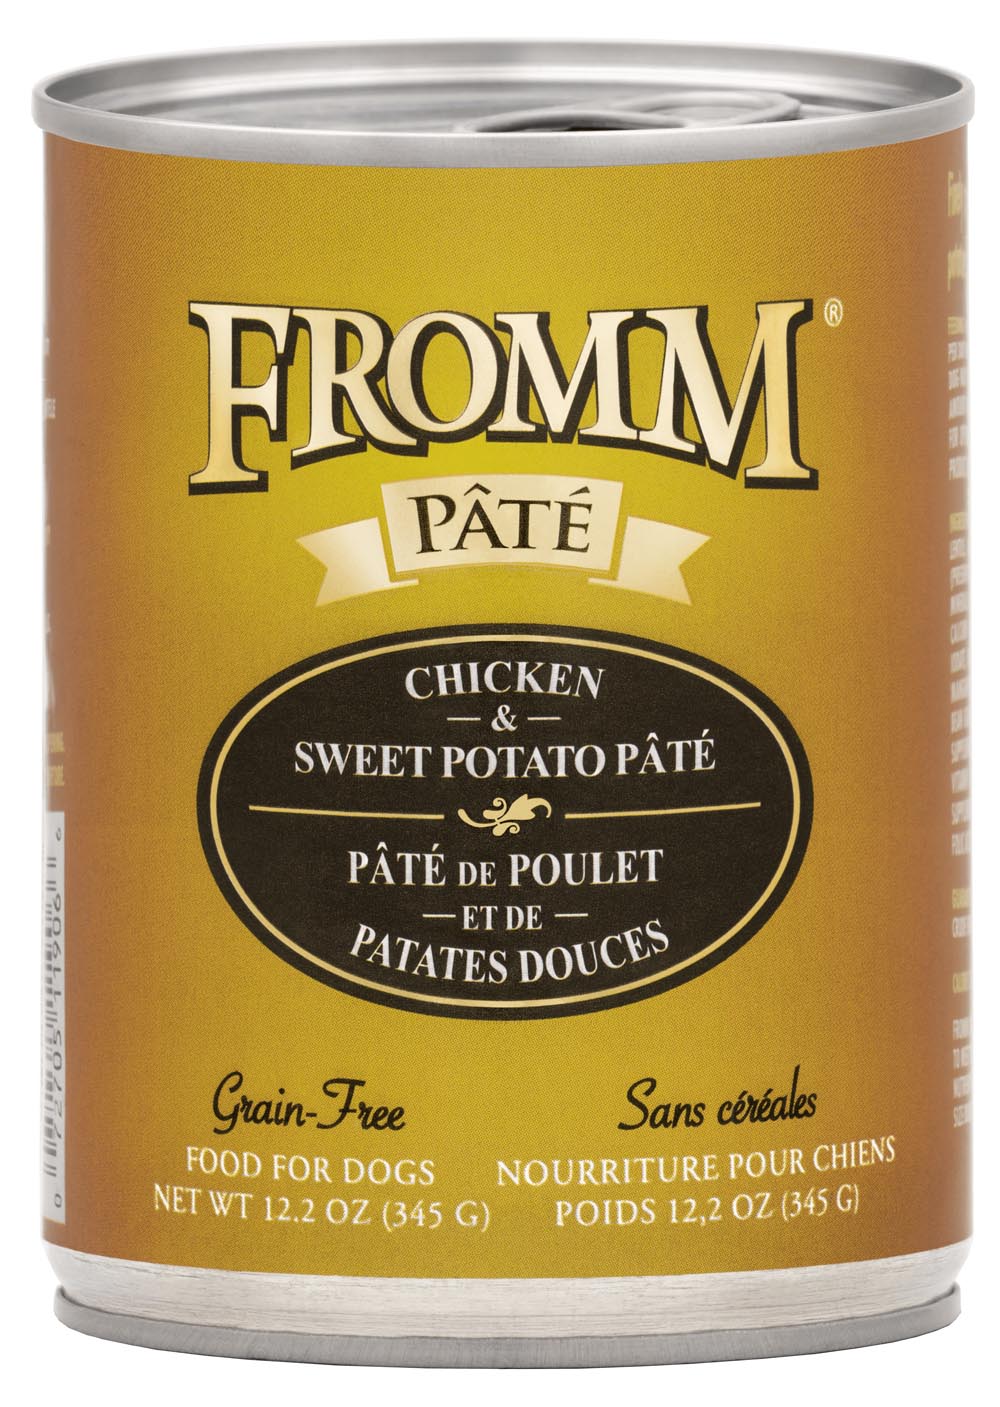 Fromm Chicken & Sweet Potato Pate Food for Dogs, 12.2 OZ